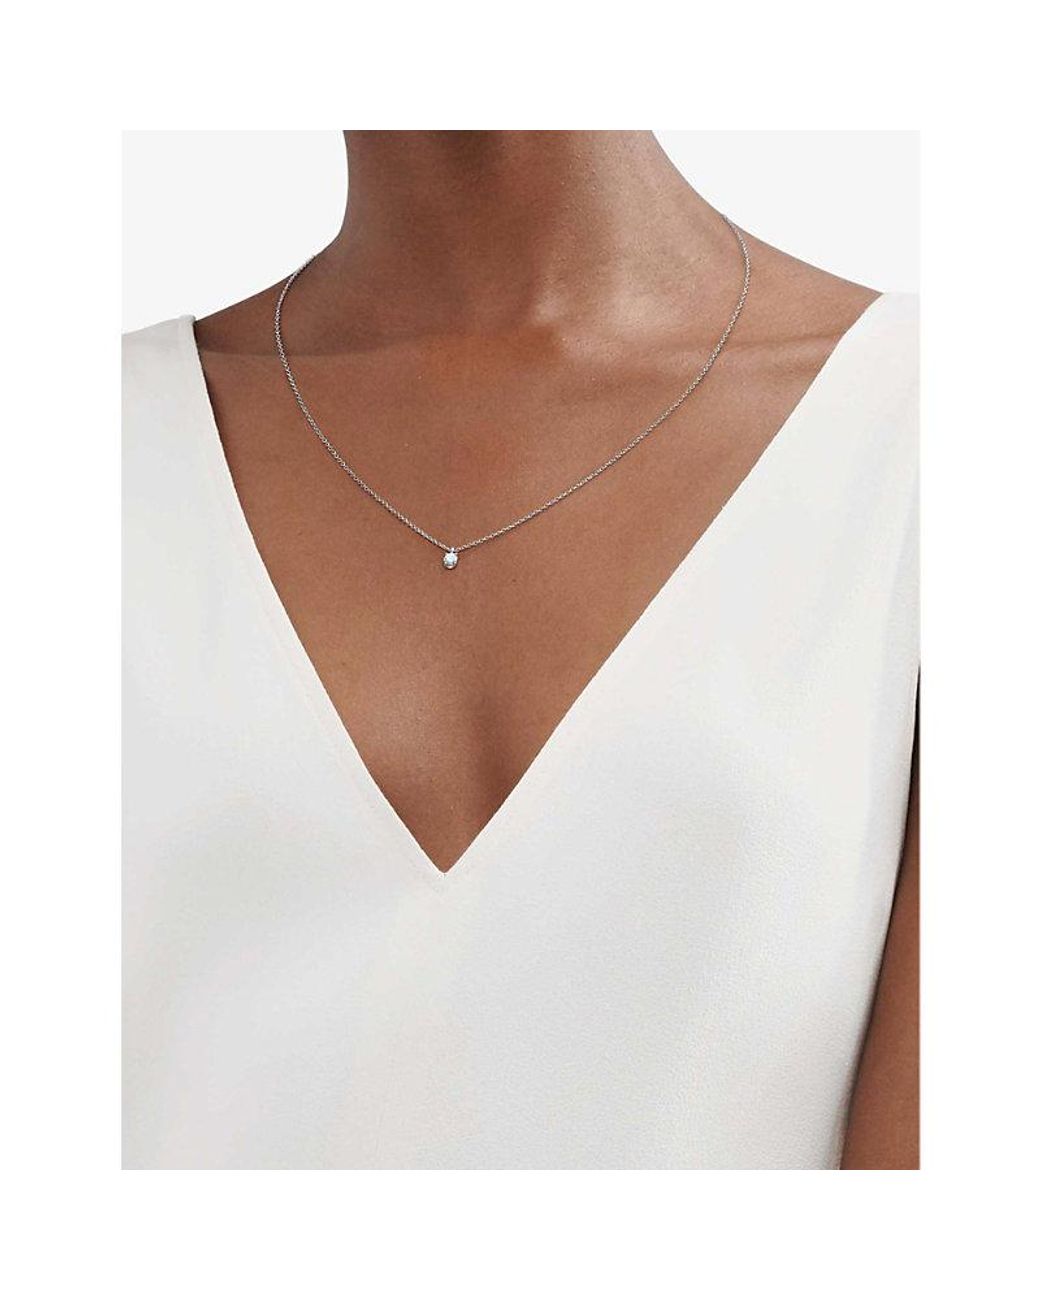 Tiffany & Co. And 0.17ct Solitaire Diamond Necklace in White